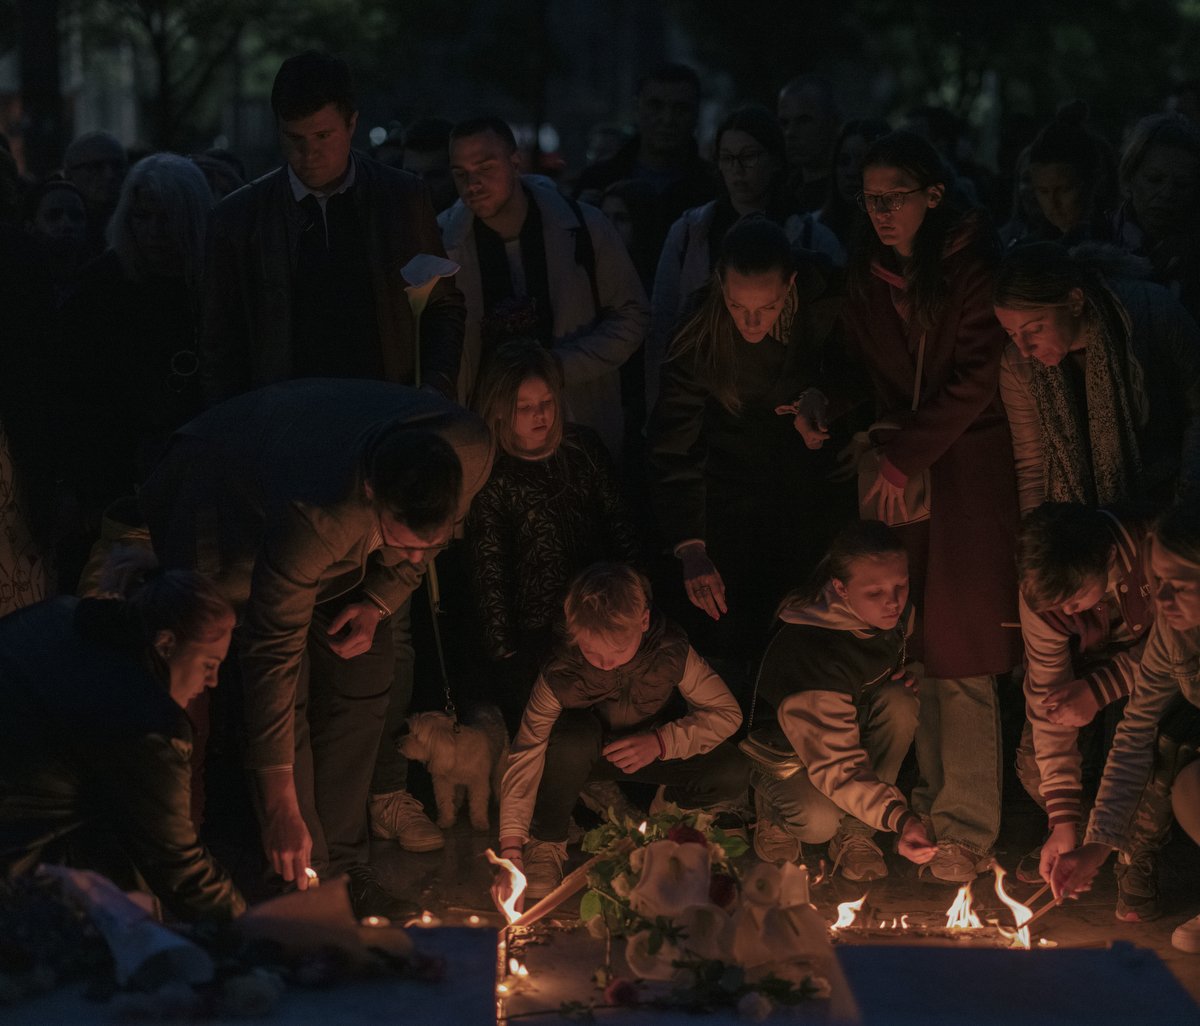  People light candles during a vigil following a shooting at a school in the Serbian capital Belgrade on May 3, 2023. Serbian police arrested a student following a shooting at an elementary school in the capital Belgrade on May 3, 2023, the interior 